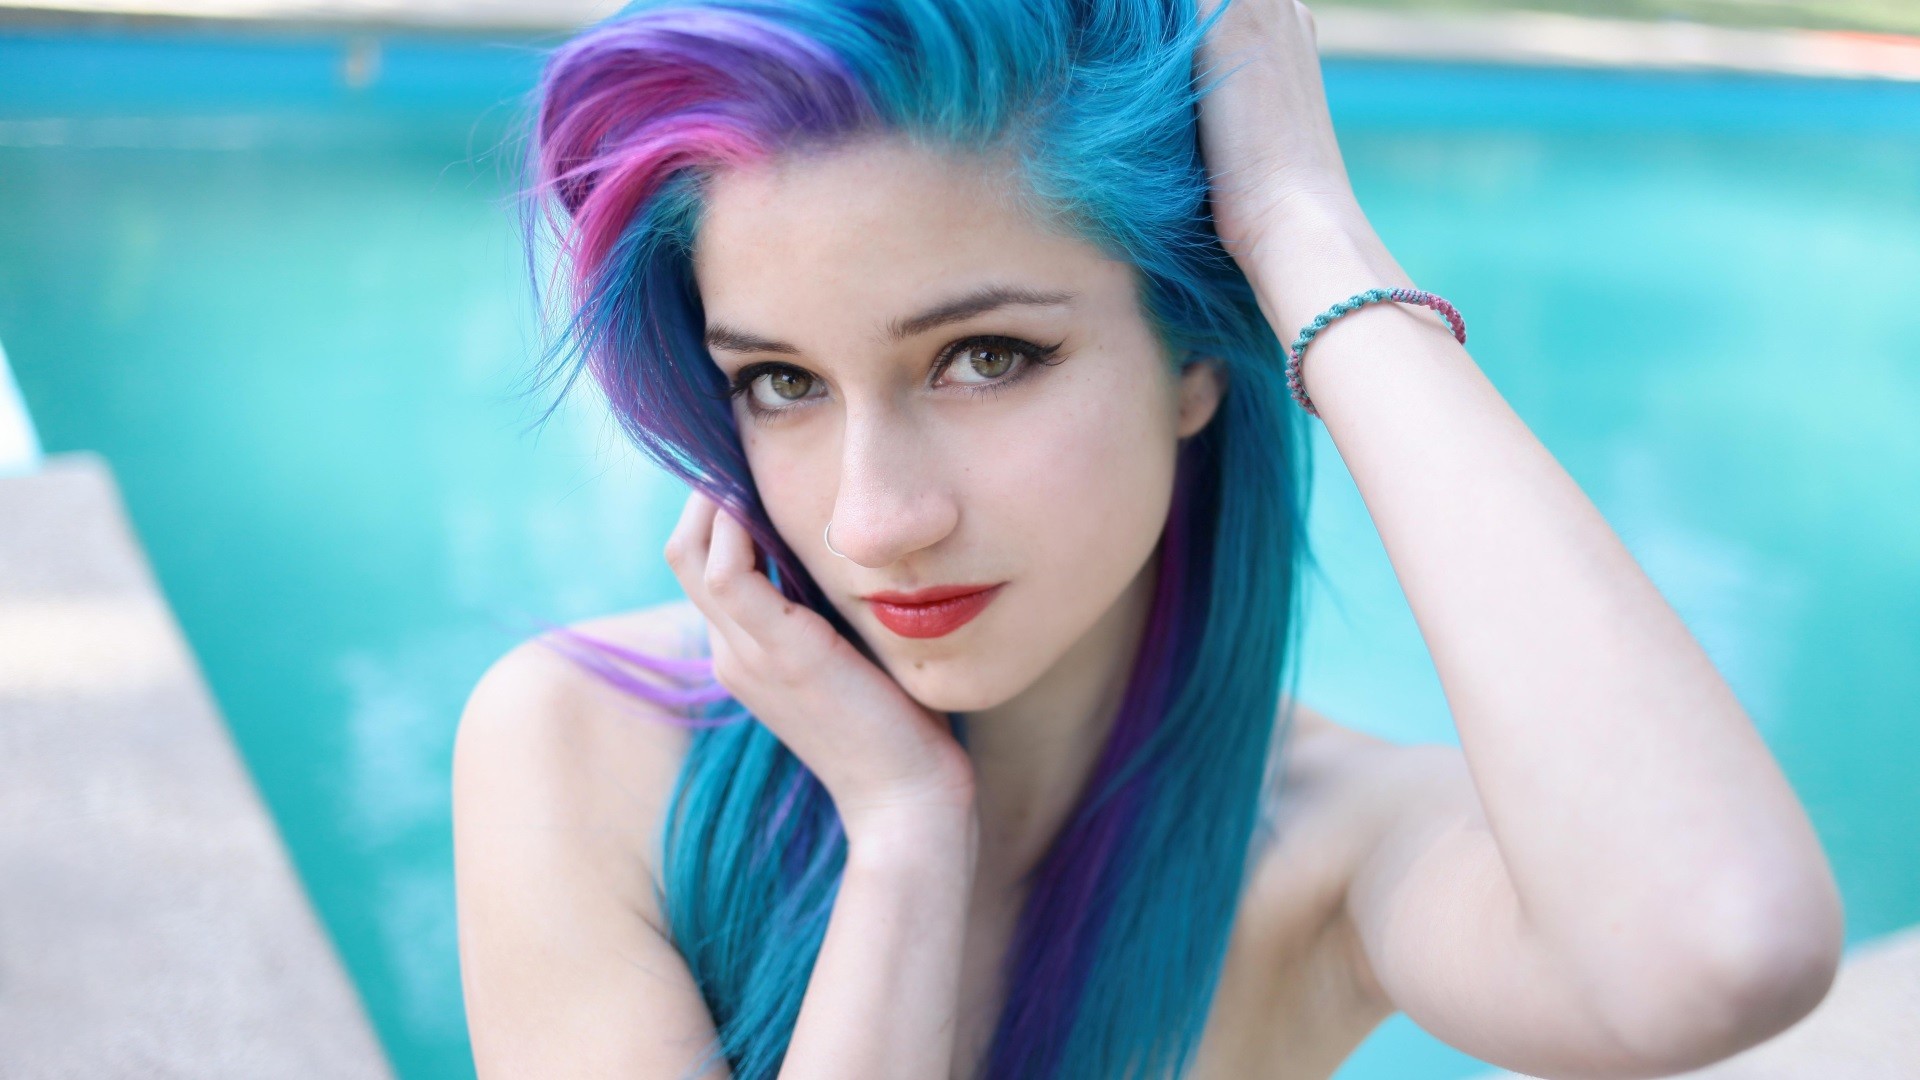 Fay suicide girl Family: Woman